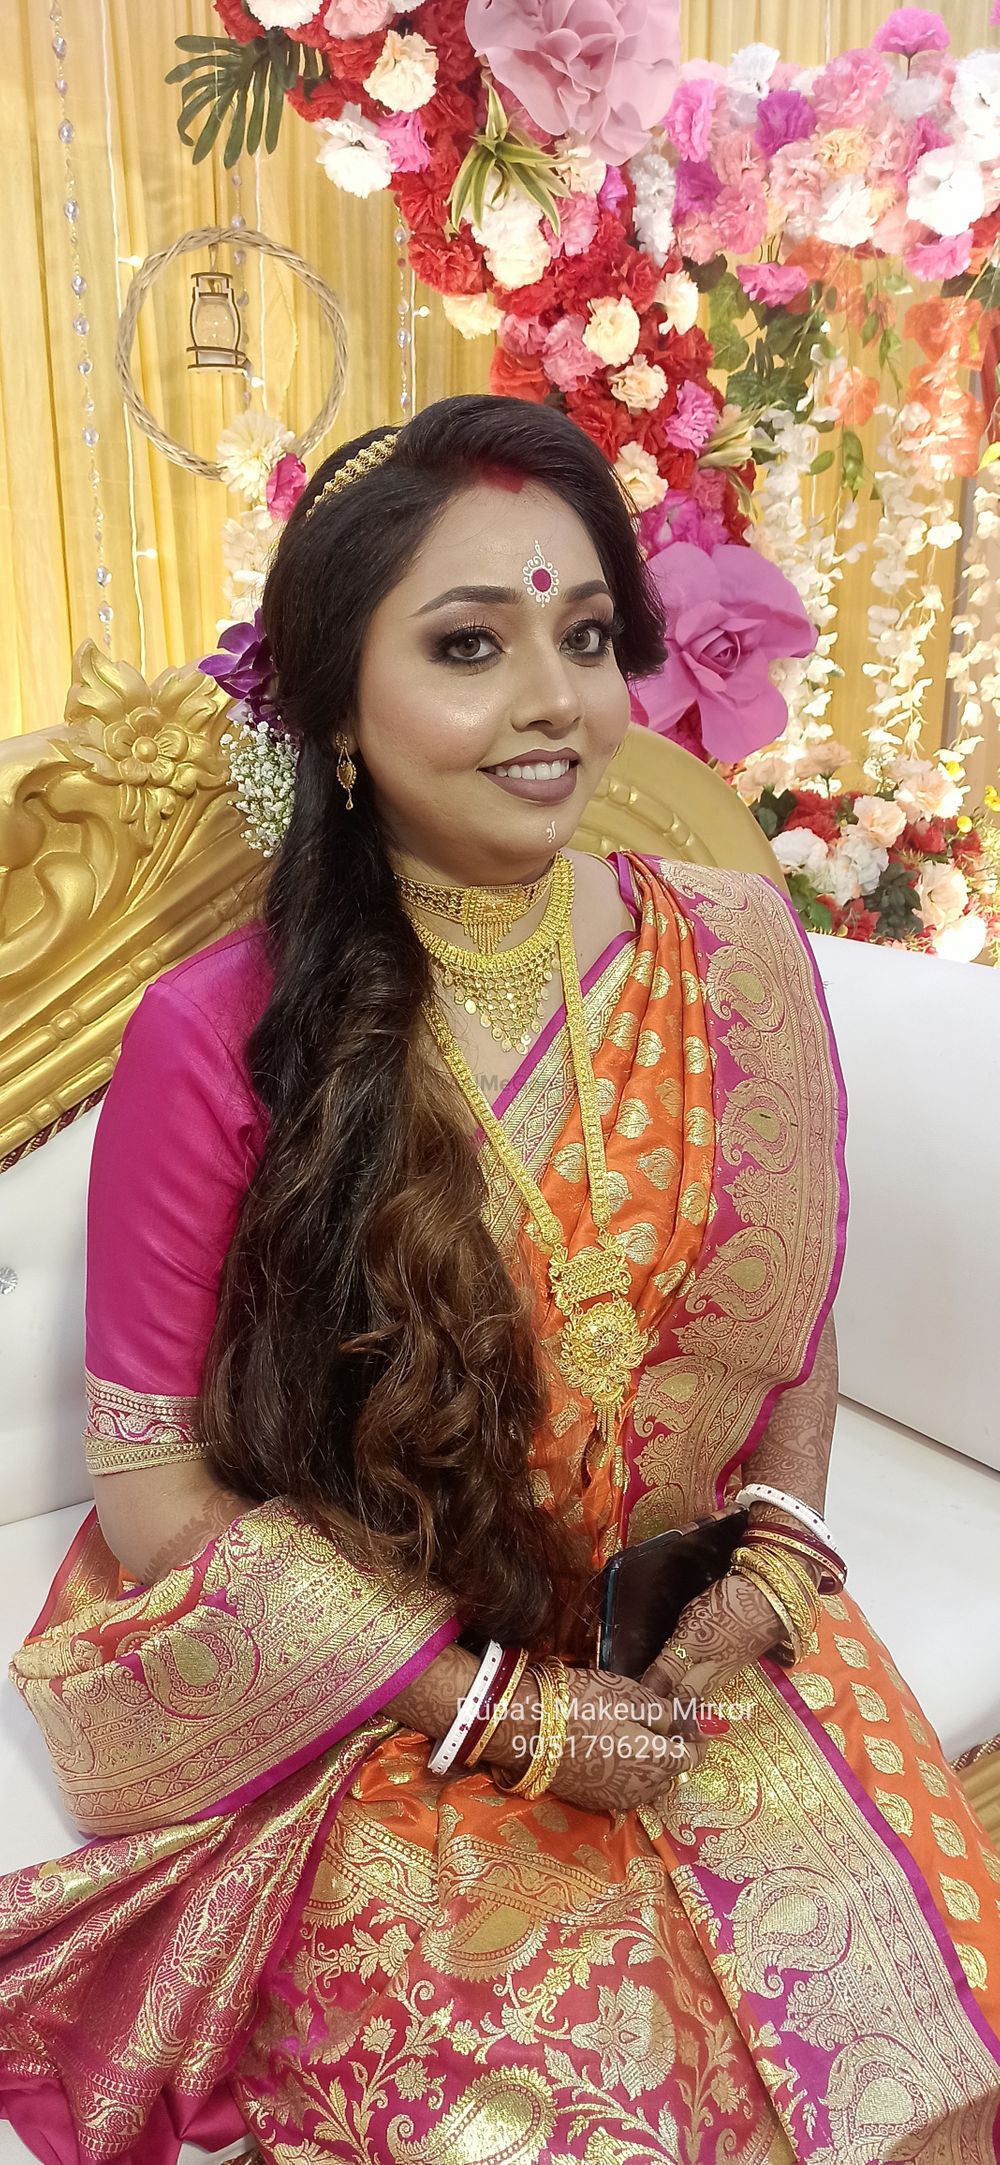 Photo From Bridal Makeover-96 - By Rupa's Makeup Mirror